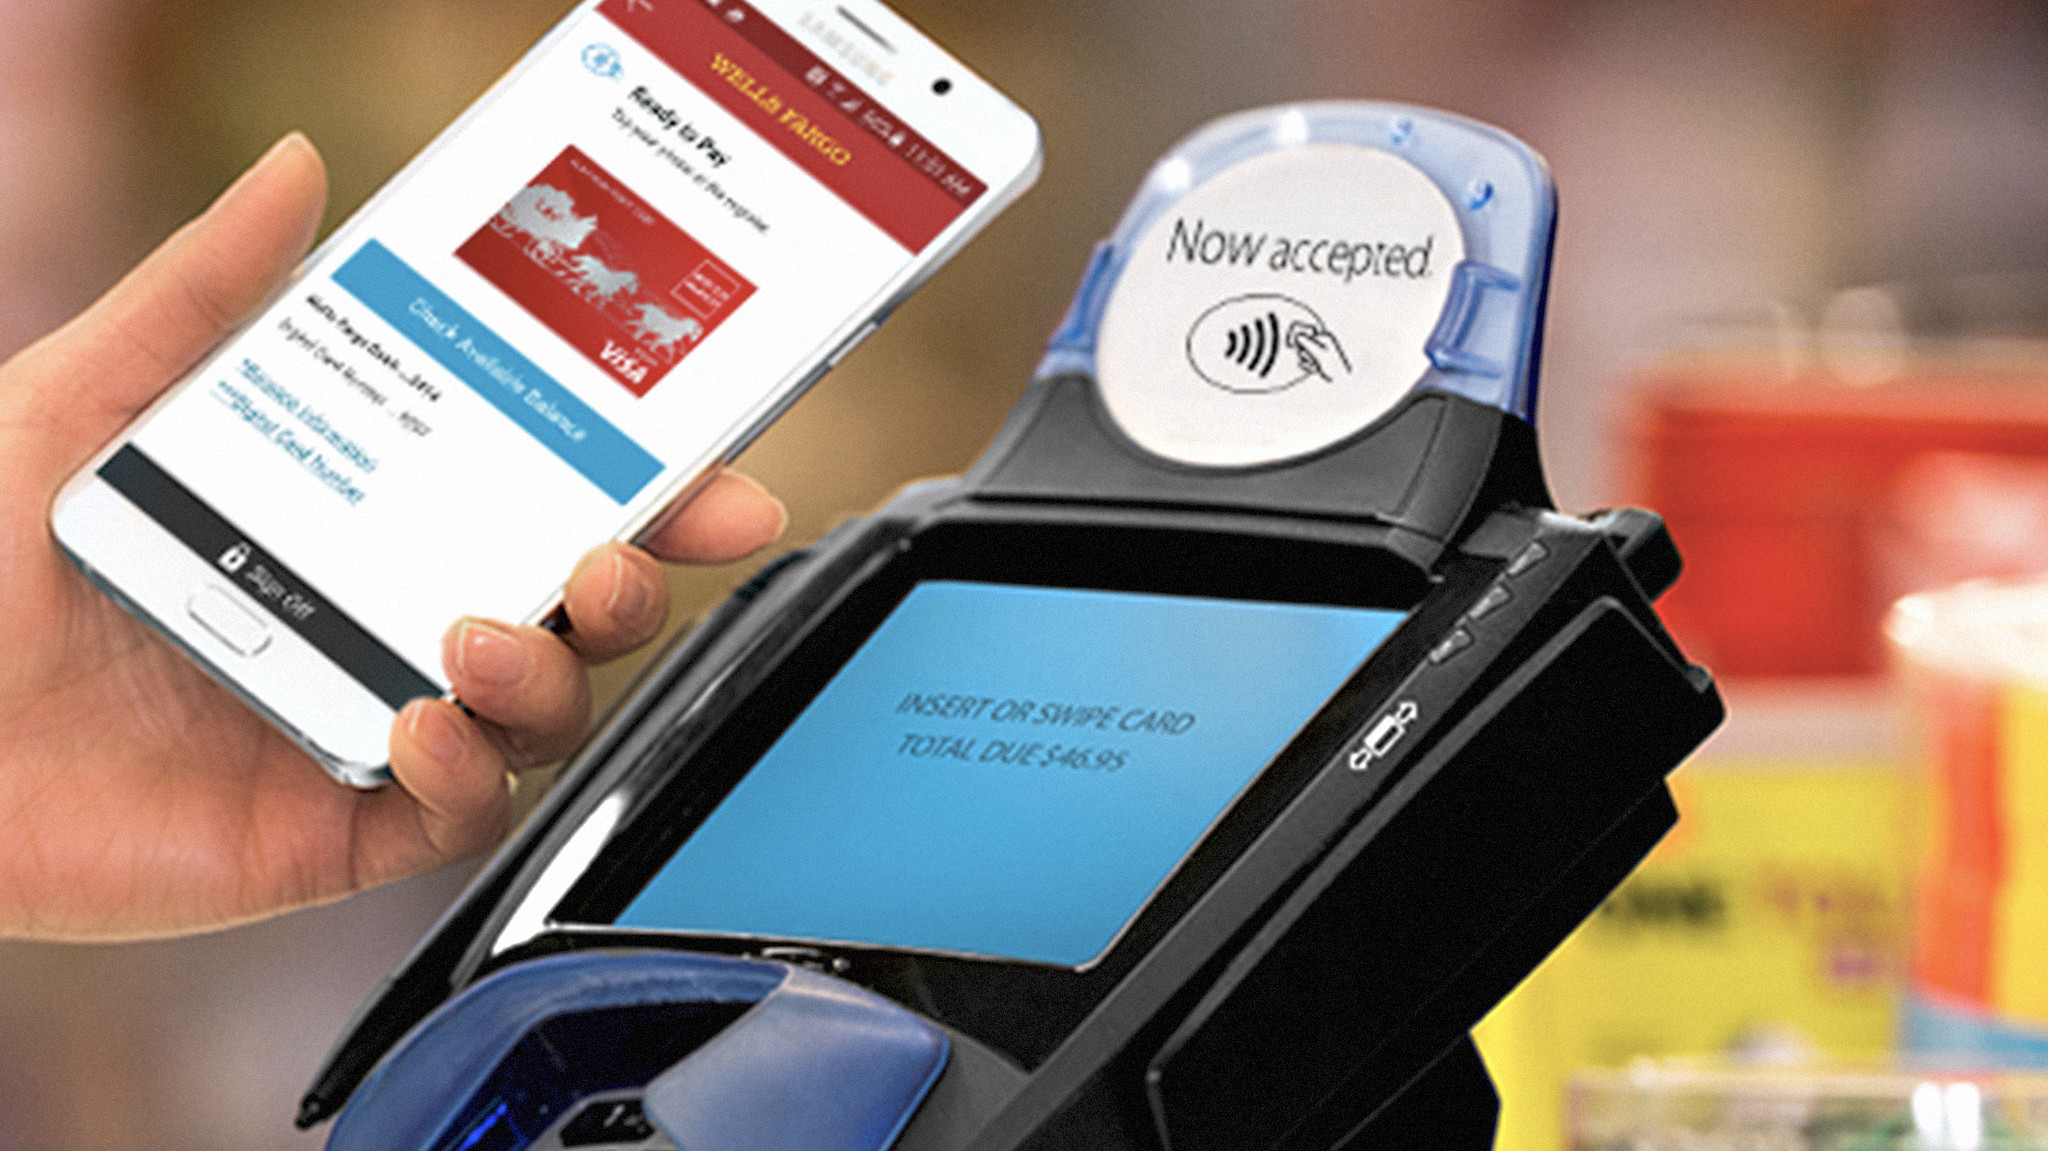 Magazine - Mobile Wallets & Digital Payments 